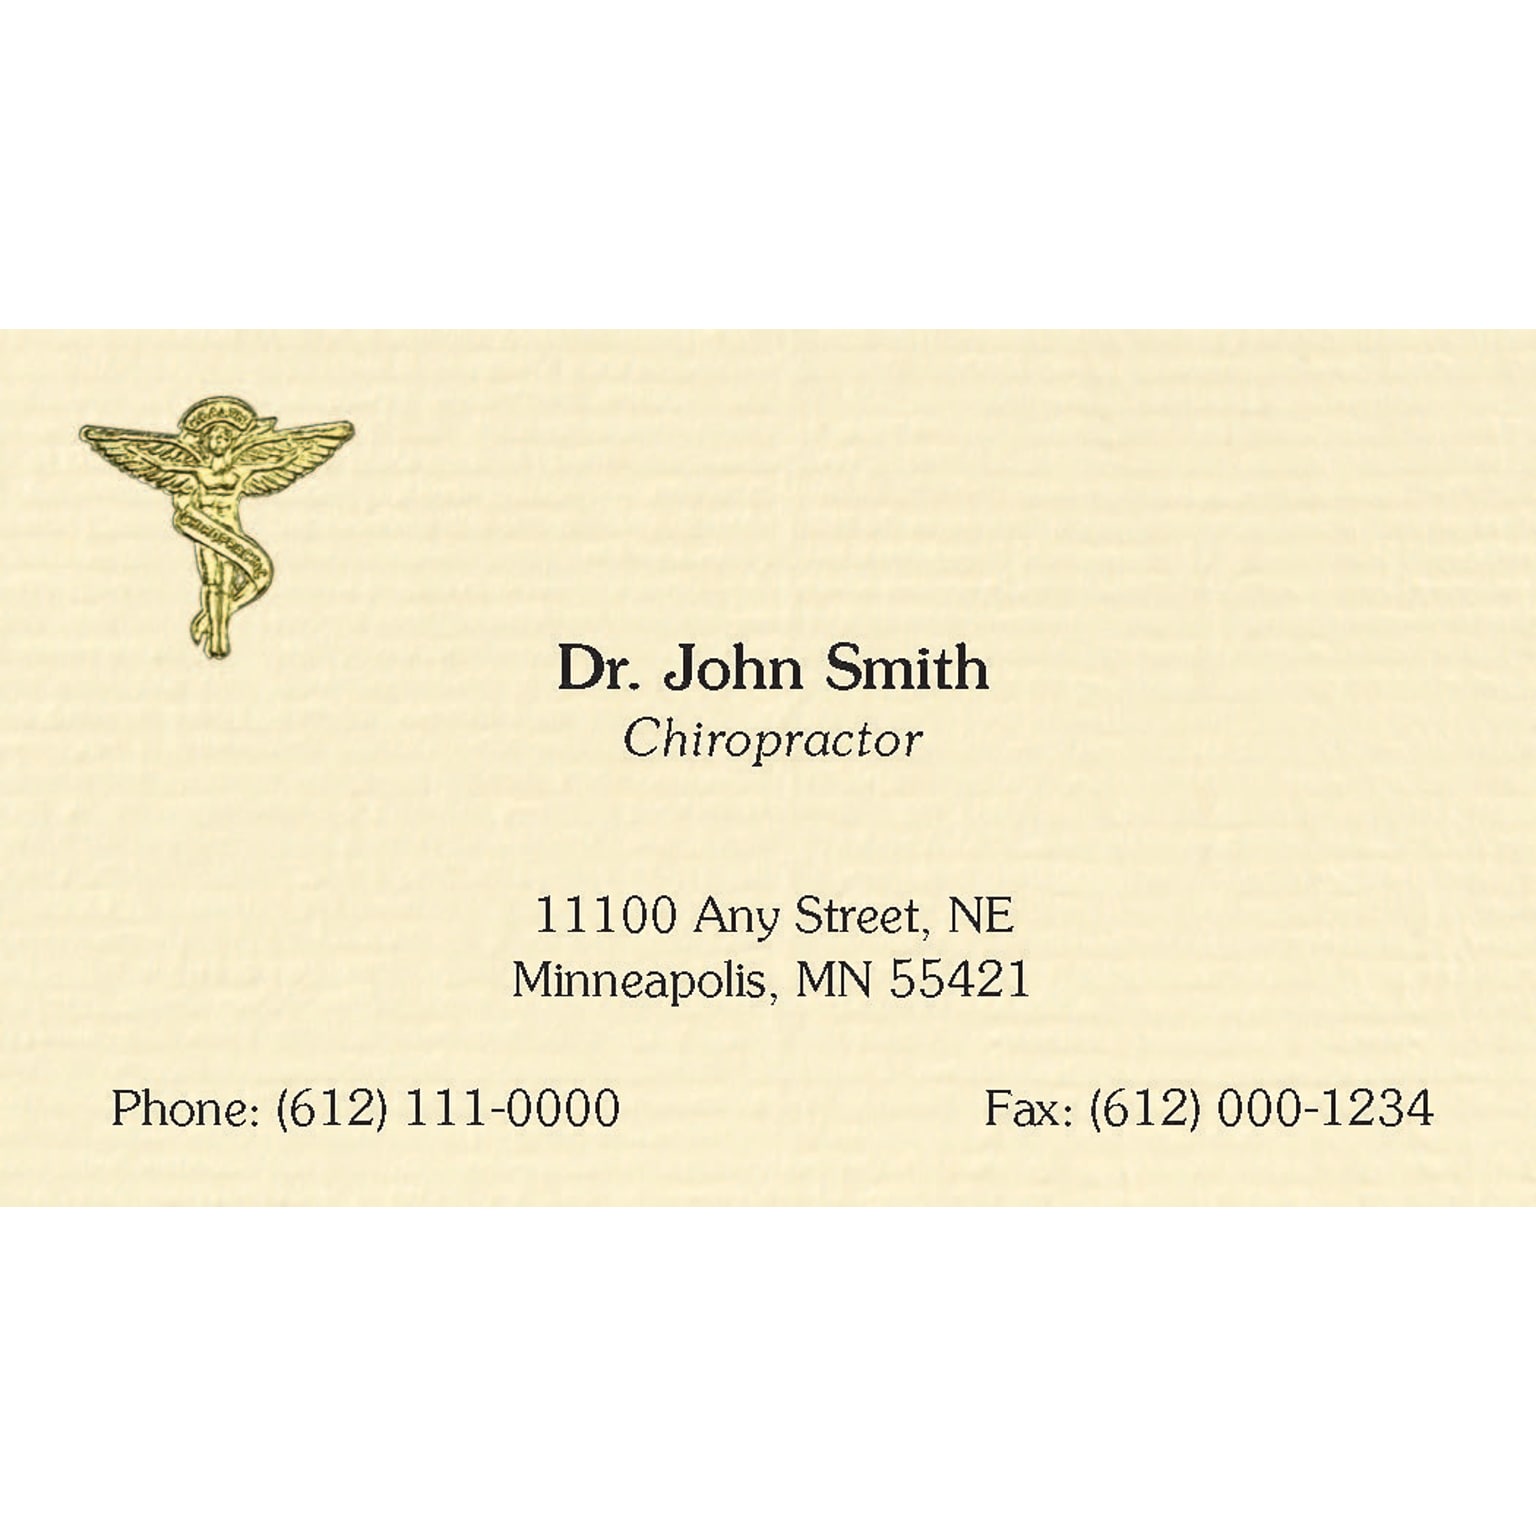 Custom Gold Foil Embossed Business Cards, CLASSIC® Ivory Laid 80#, Raised Ink, 1 Standard Ink, 1-Sided, Logo 202, 250/PK